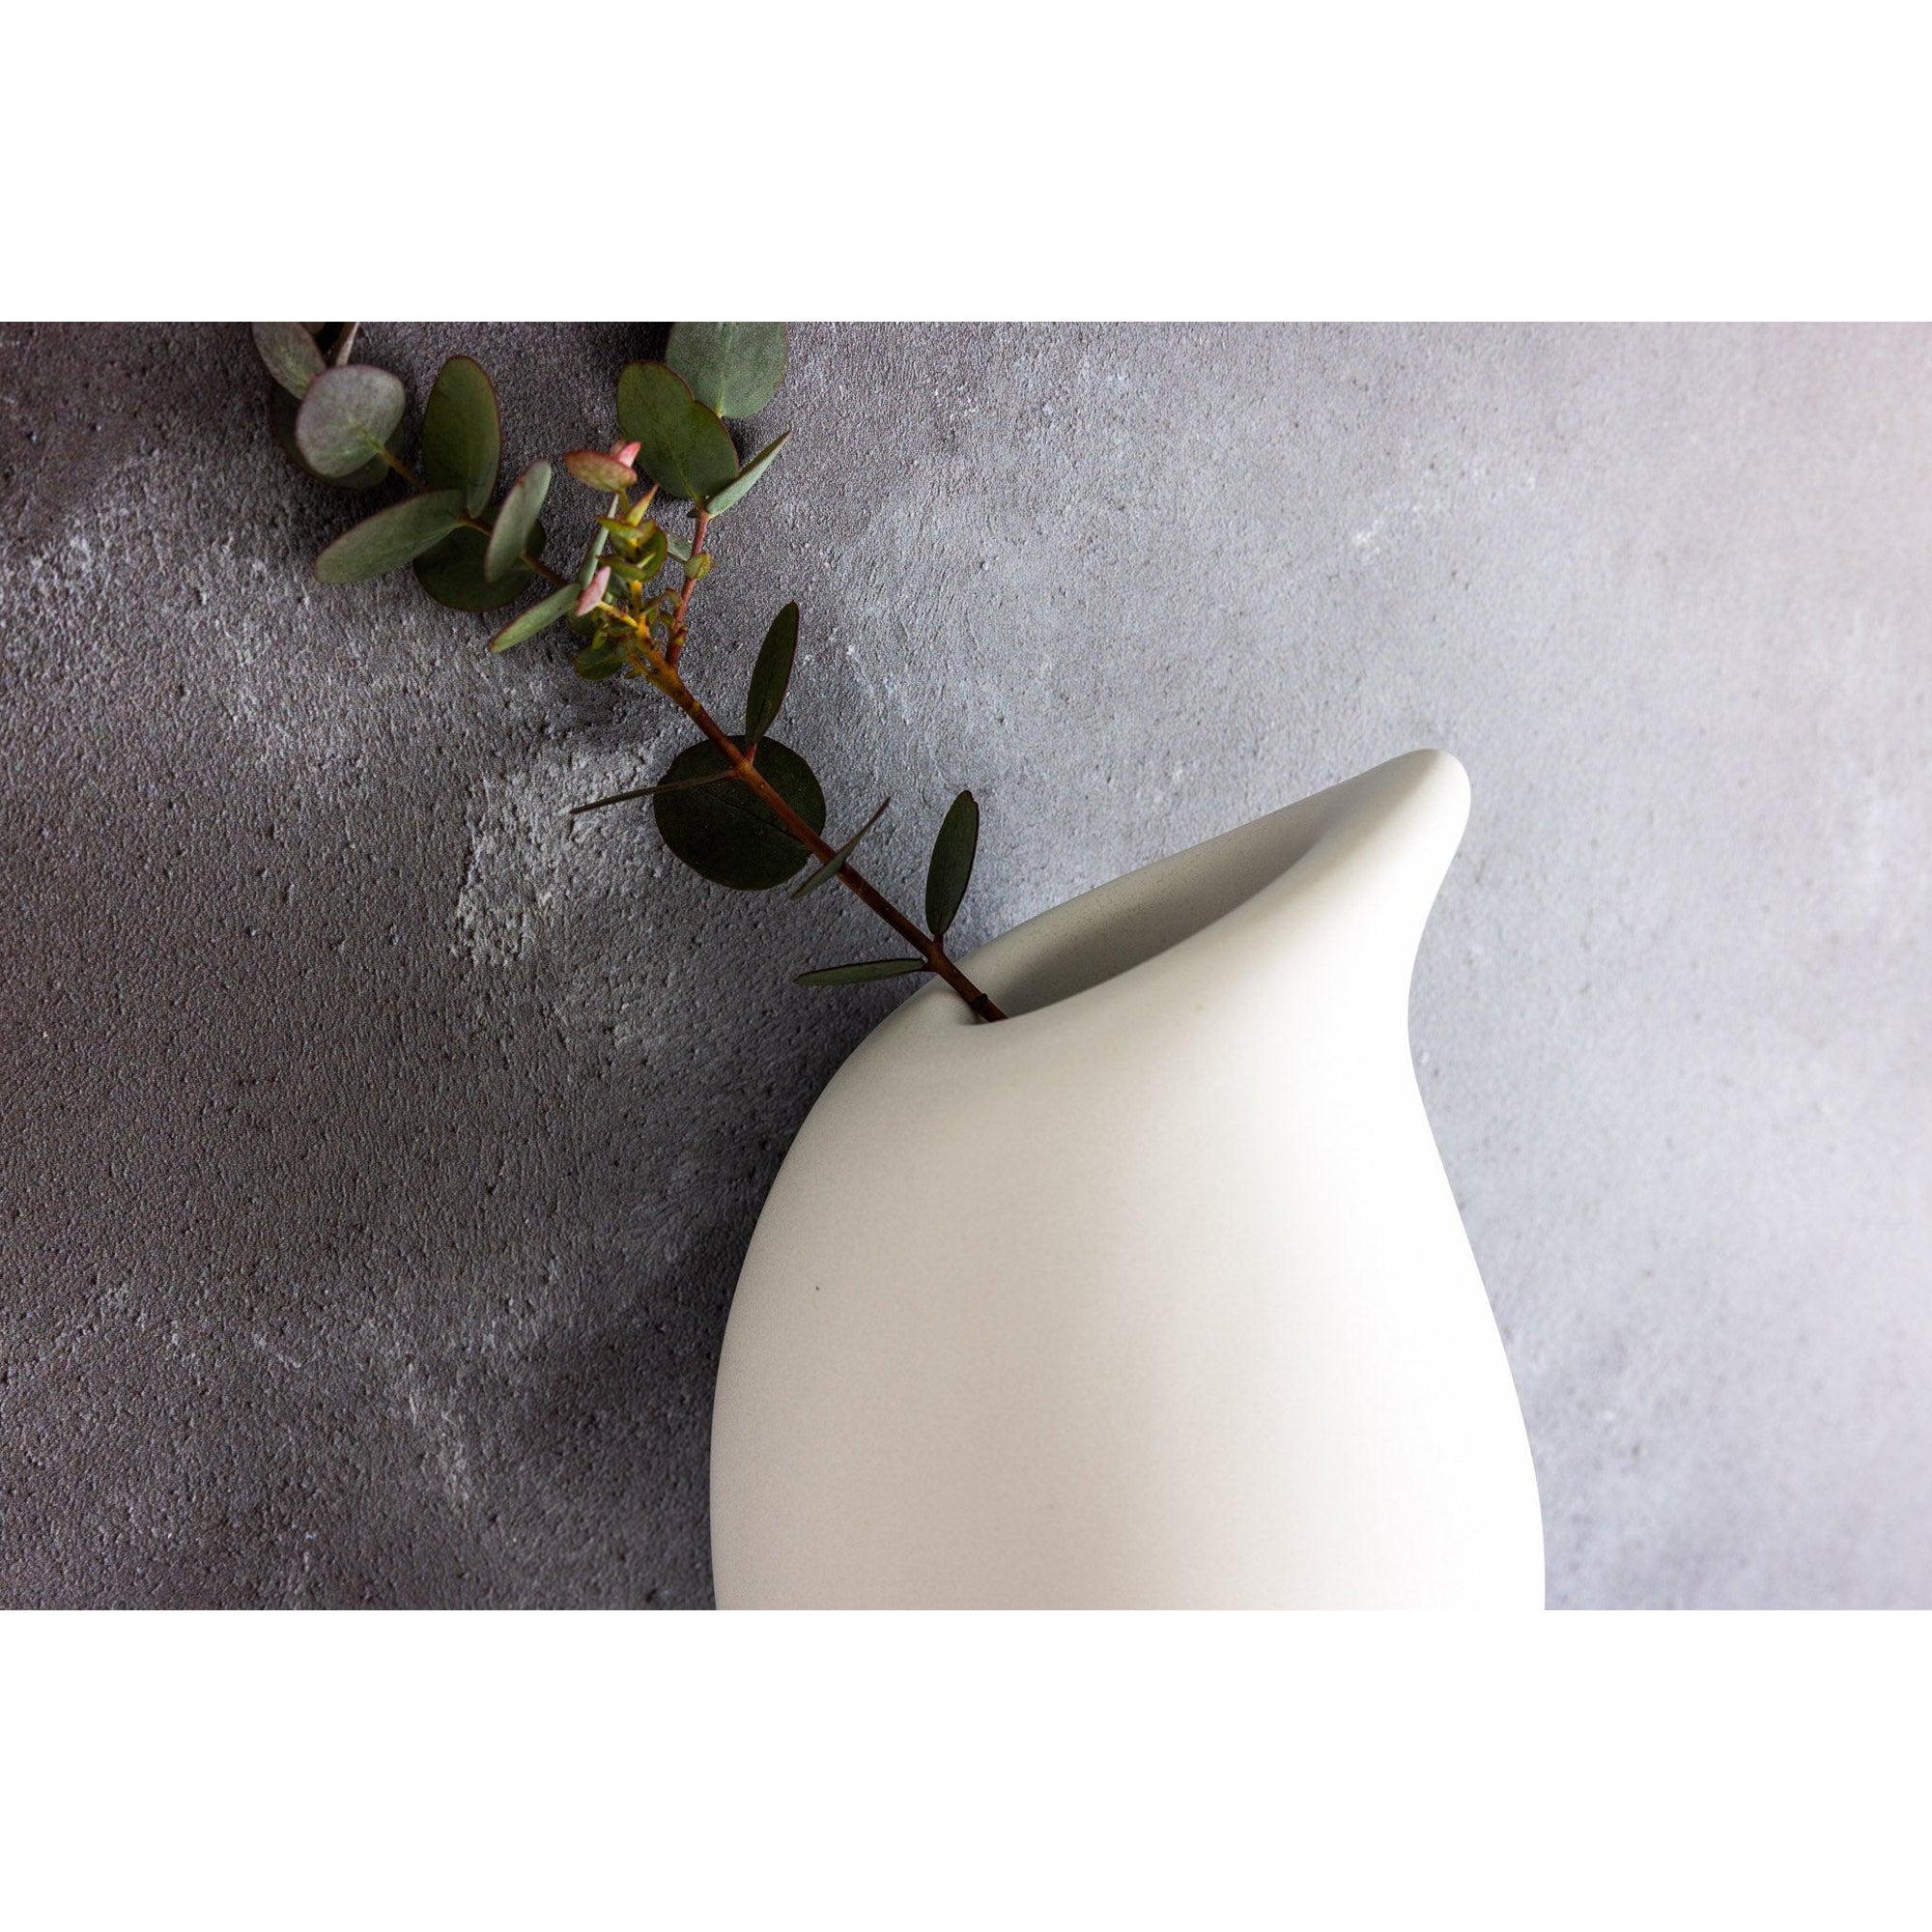 KSR4 Droplet Wall Vase by Kate Schuricht, available at Padstow Gallery, Cornwall